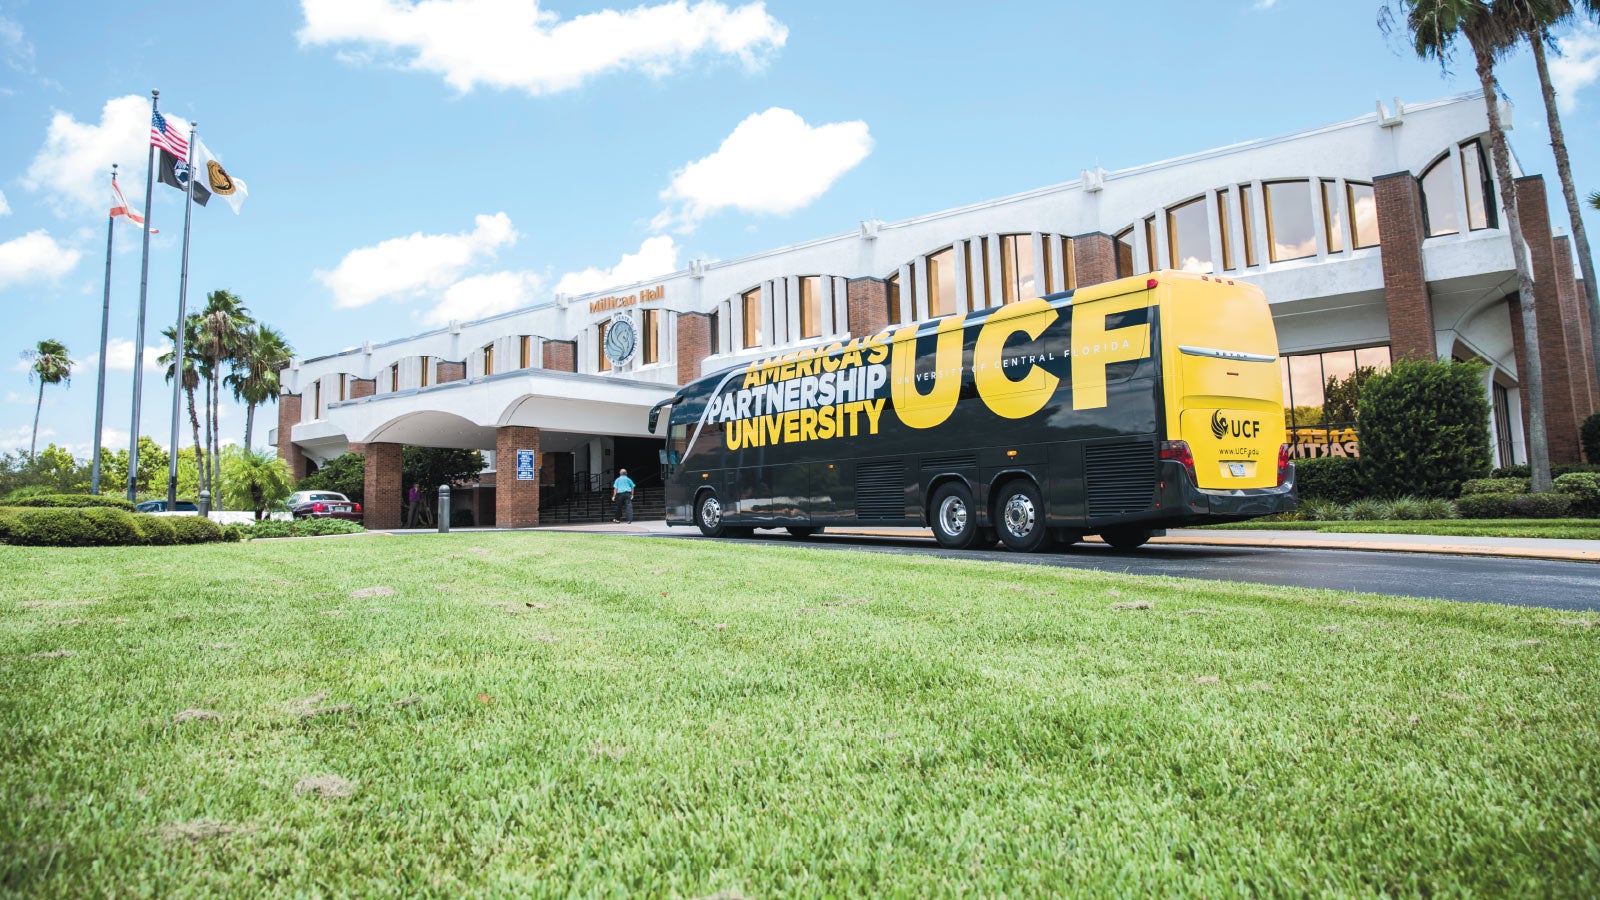 One of the two new buses that travel to and from the Rosen College of Hospitality Management